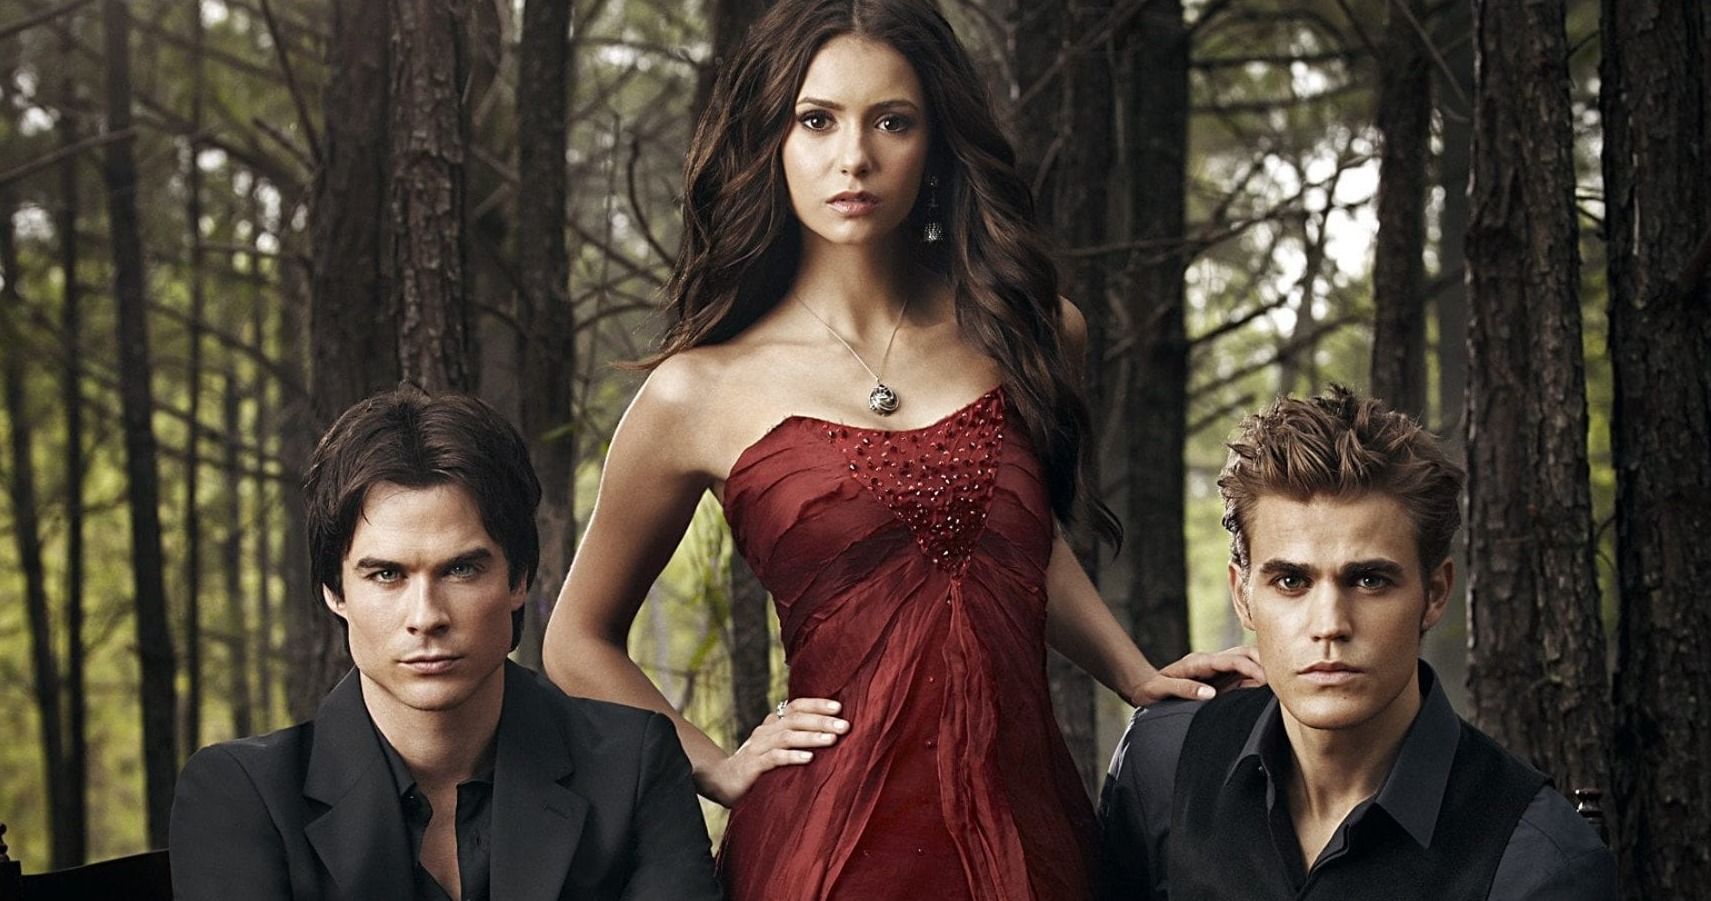 The Vampire Diaries 10 Unanswered Questions We Still Have About Vampires